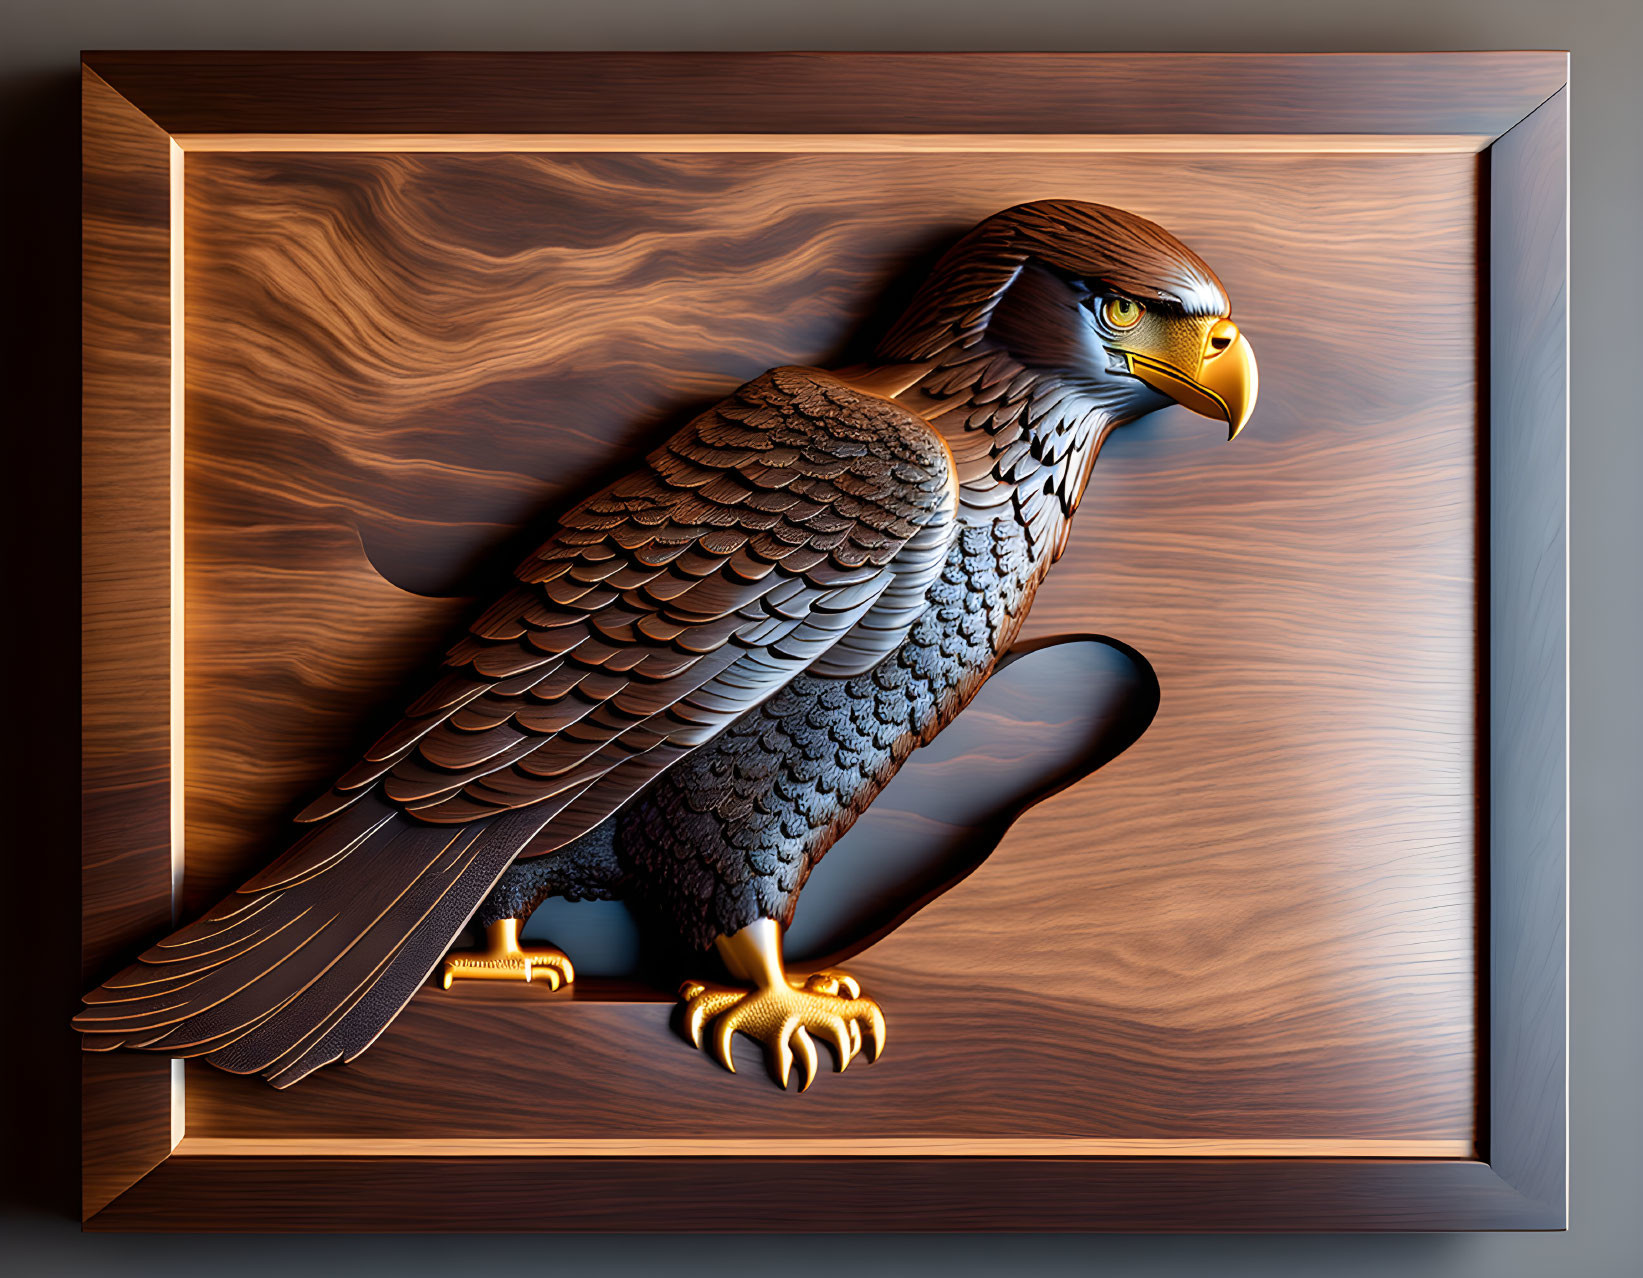 A wooden bas-relief of an eagle is a three